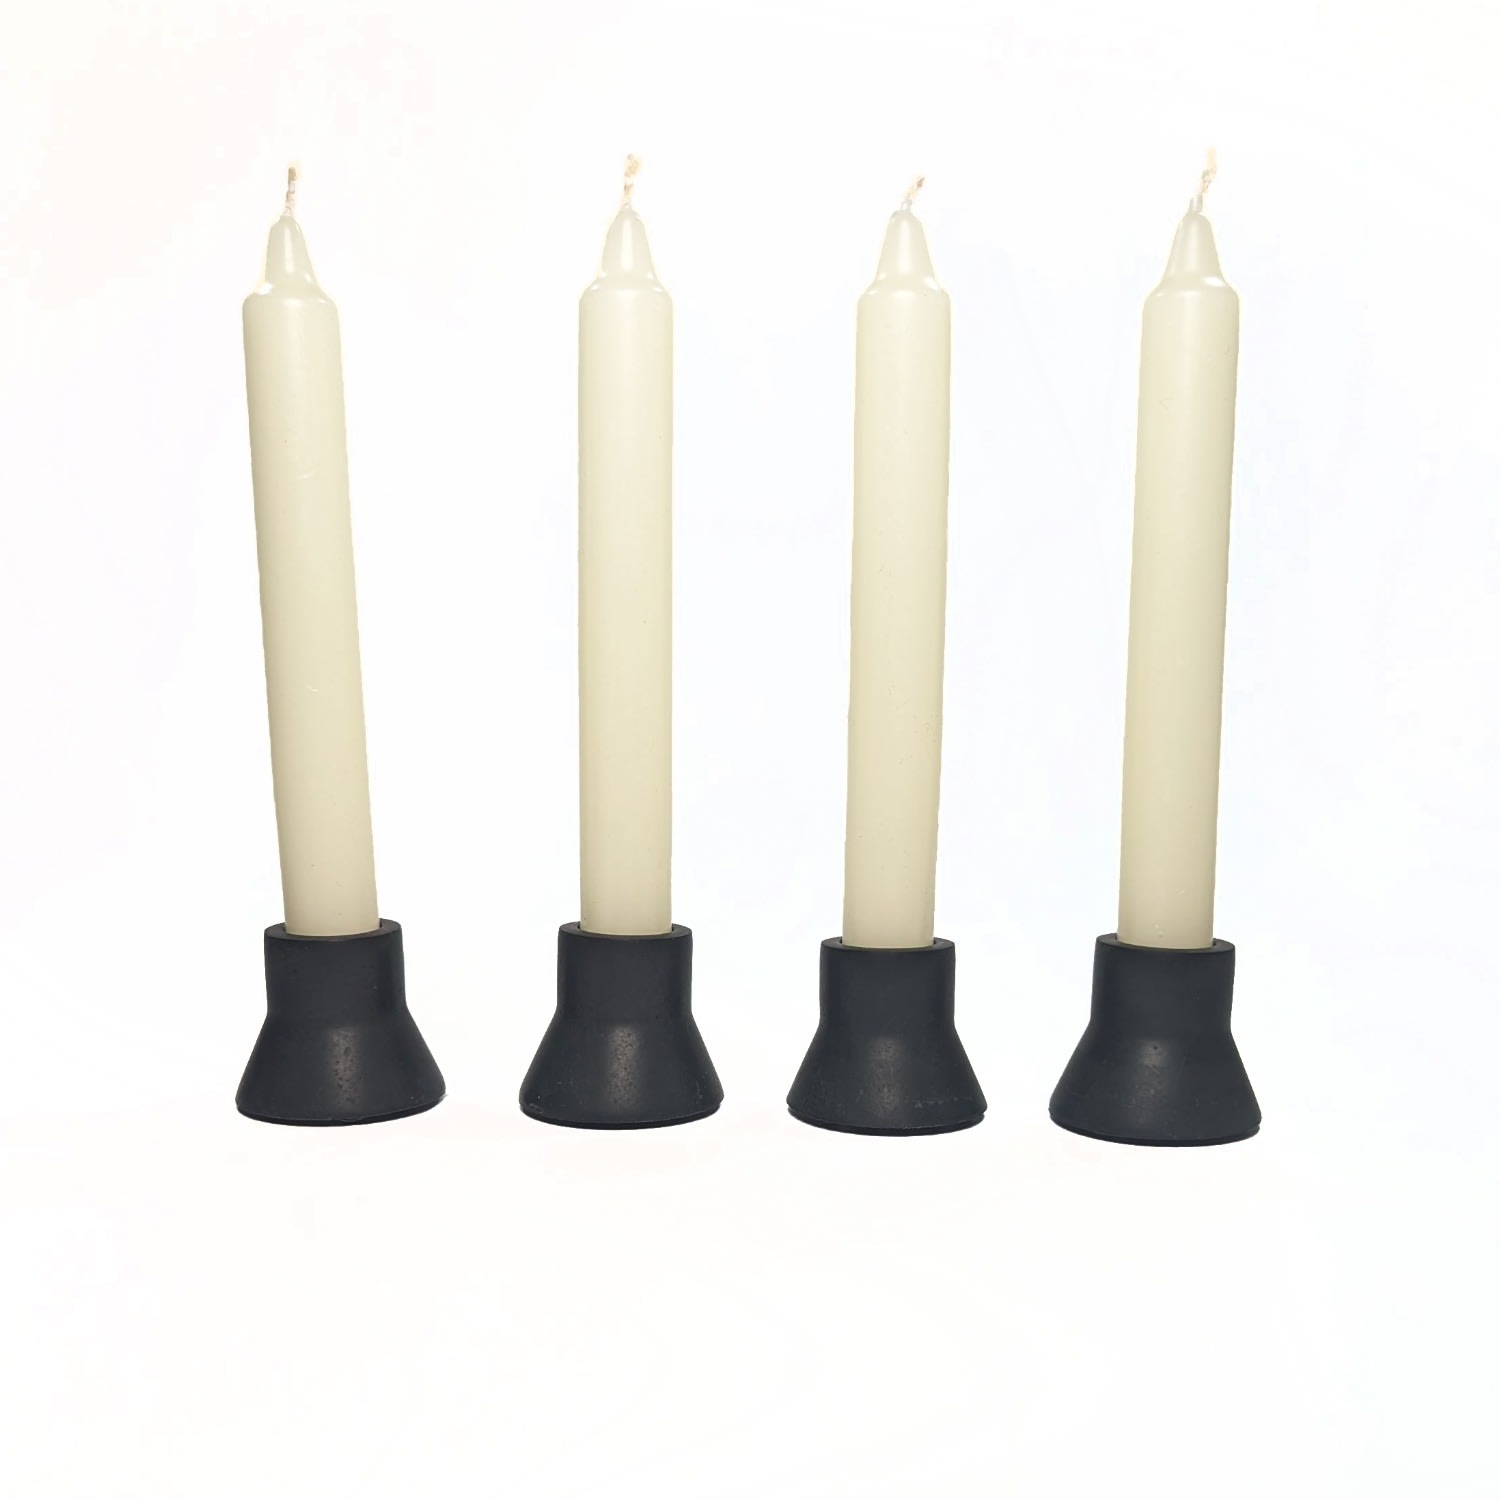 Four Taper Candle Holders - Onyx Black One Size Ruby Melo